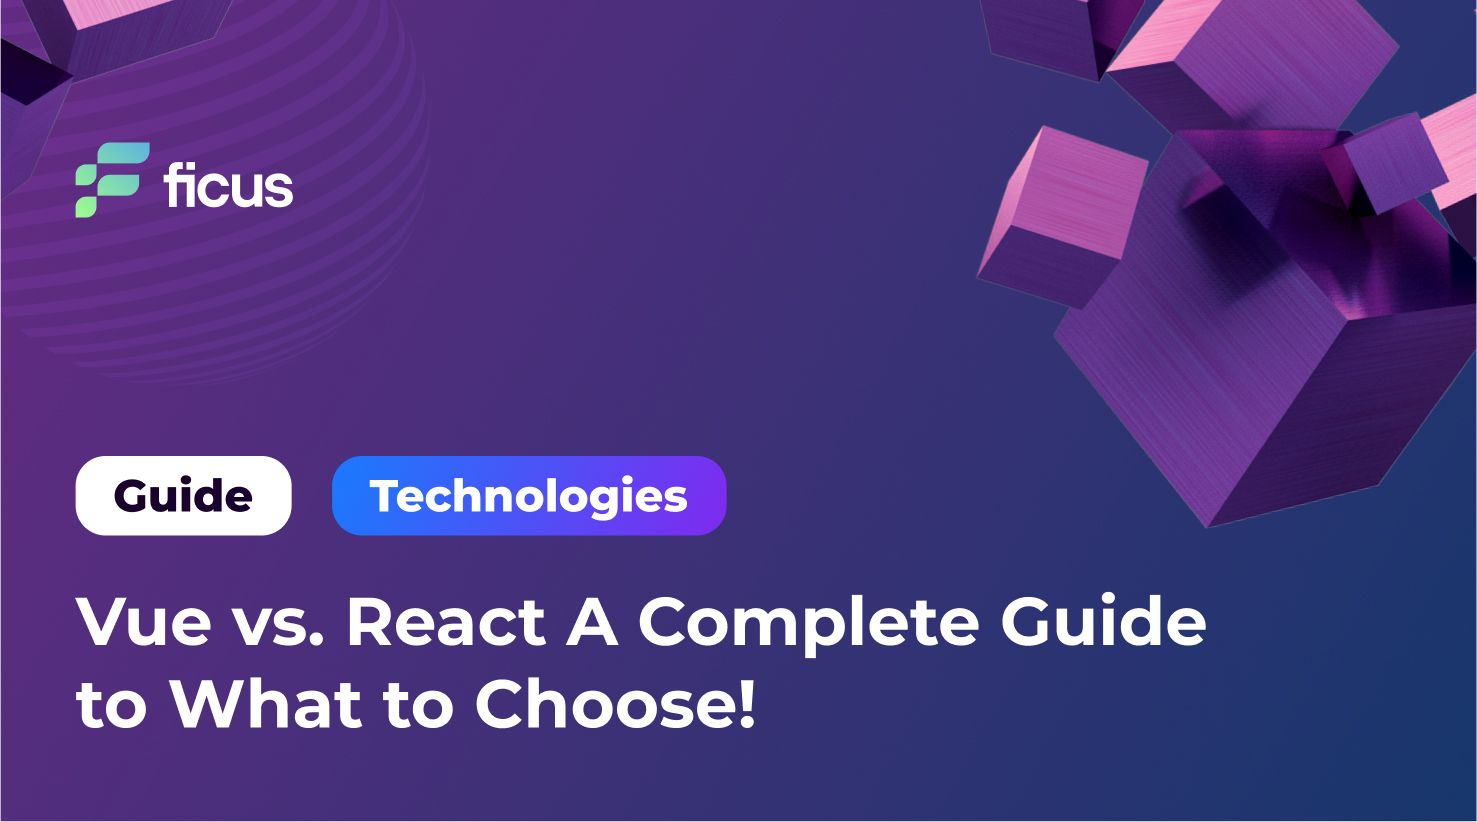 Vue vs. React A Complete Guide to What to Choose!